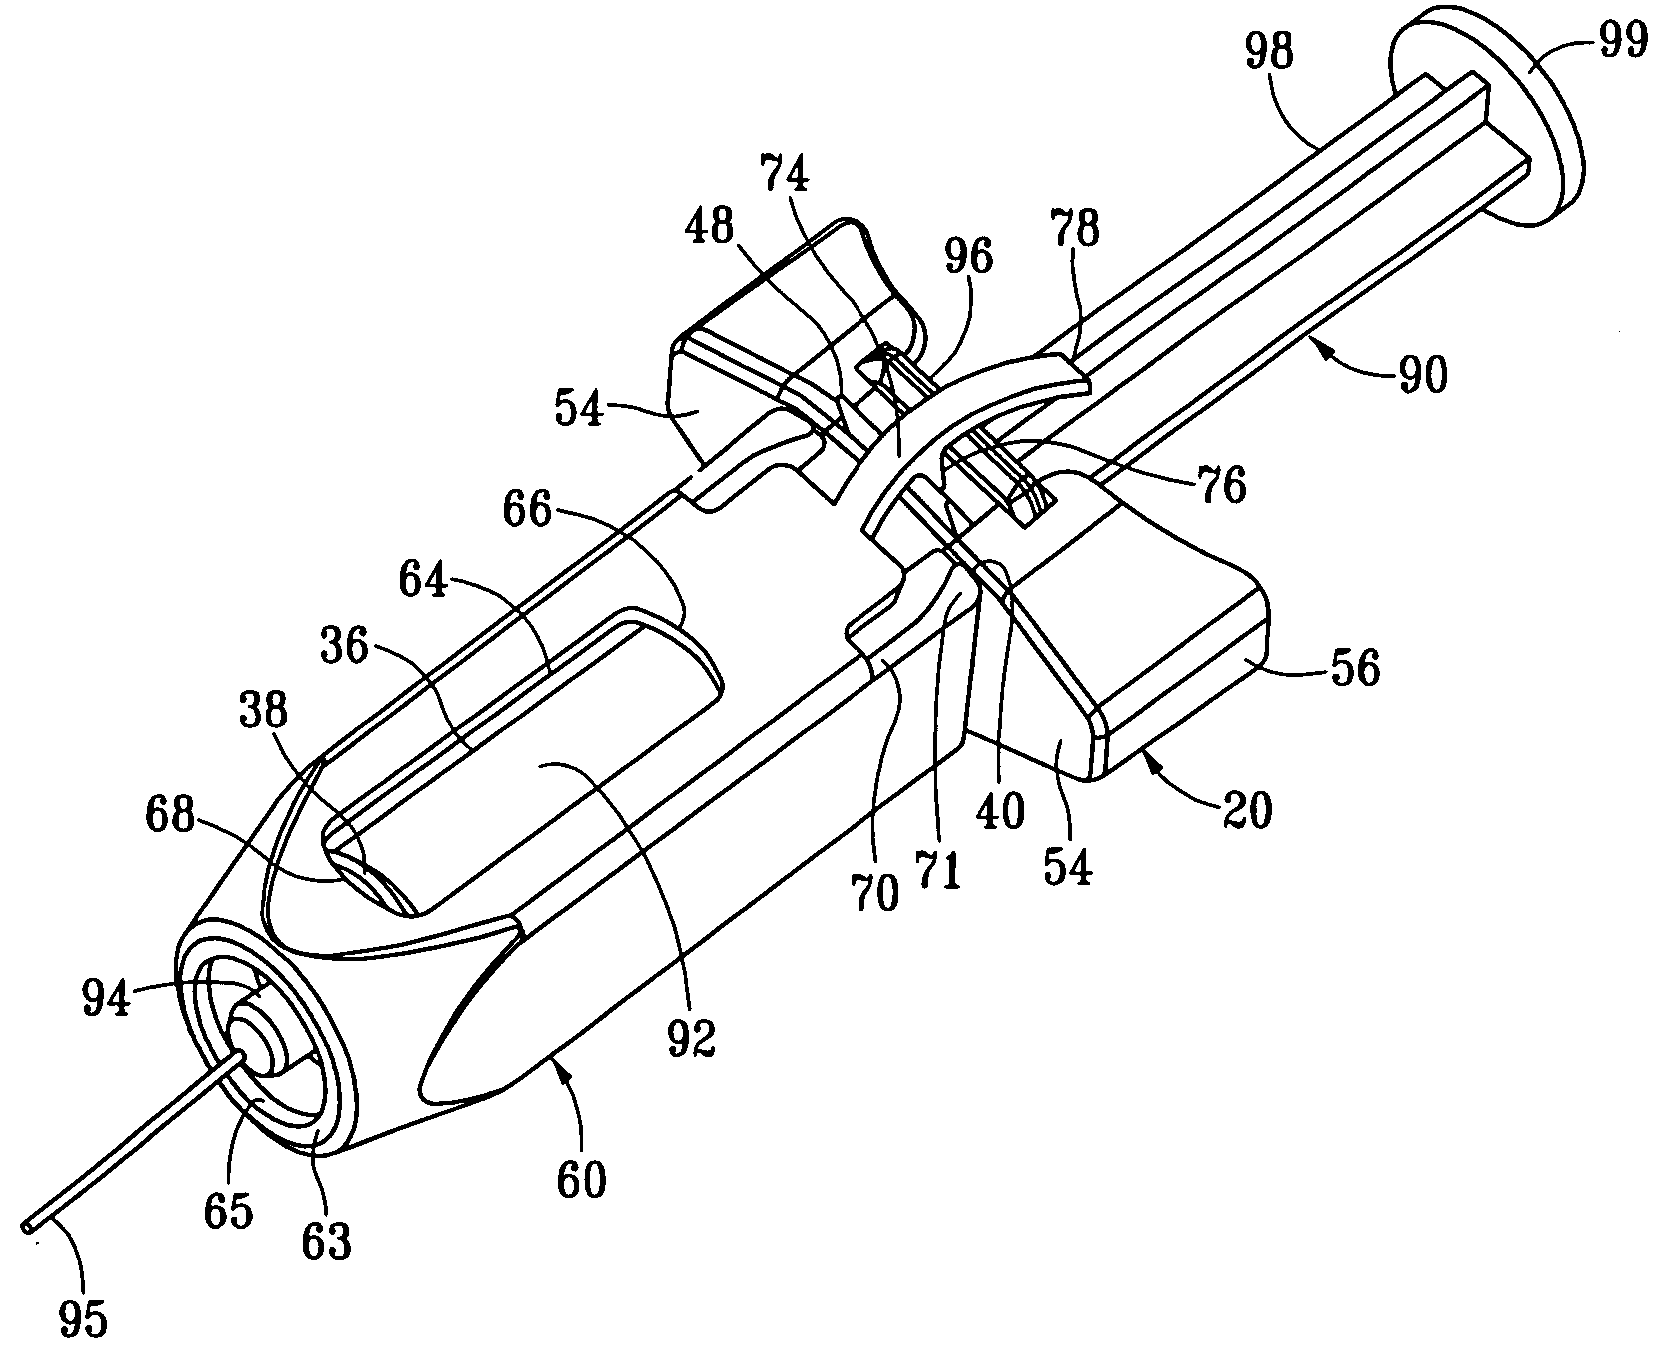 Passive needle guard for syringes